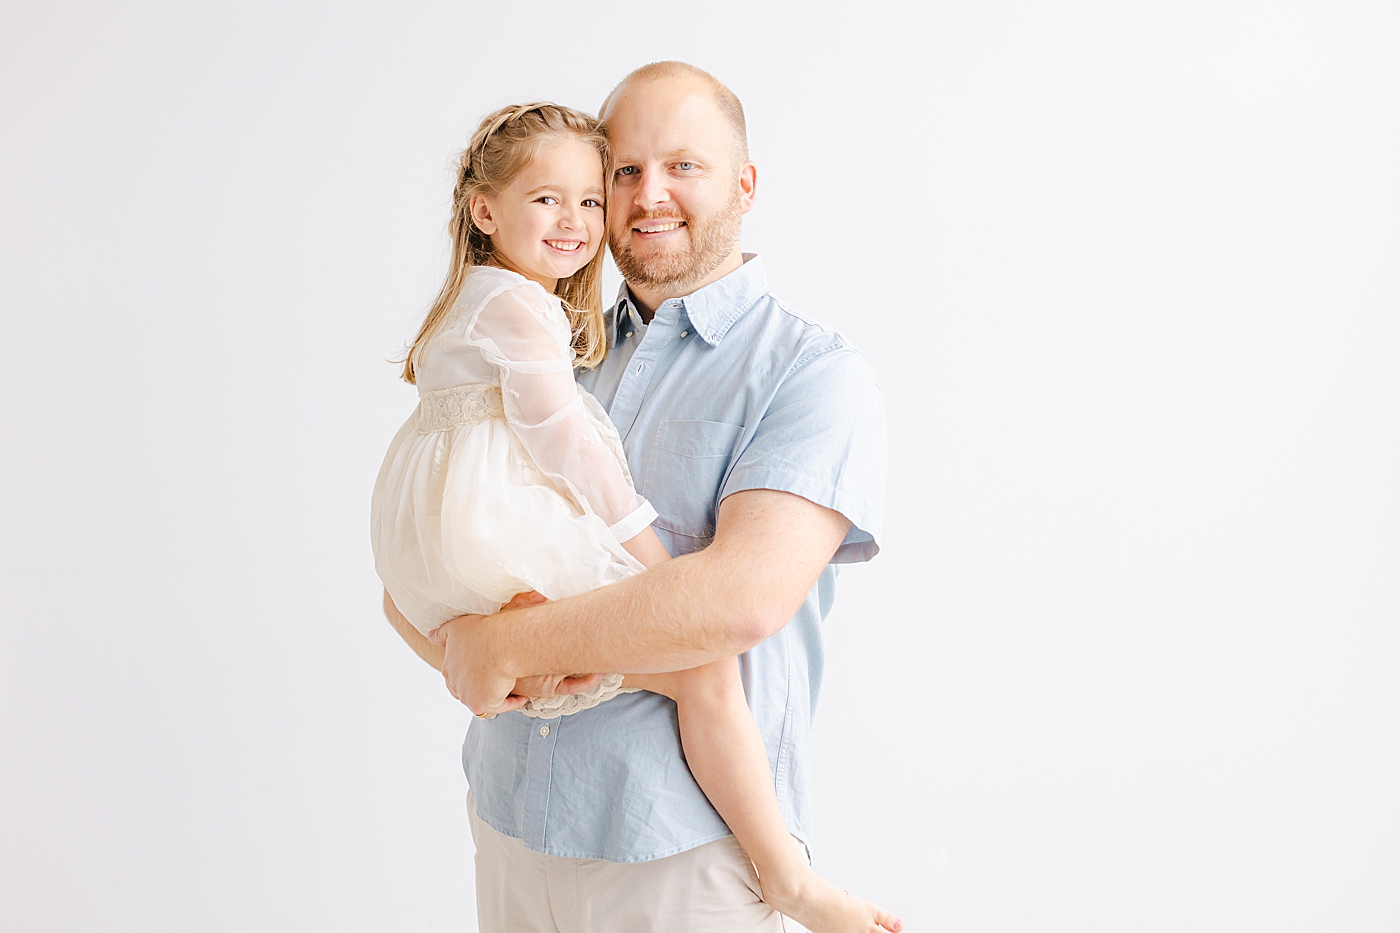 Dad holding his little girl during their playful family studio session in Austin | Photo by Sana Ahmed Photography